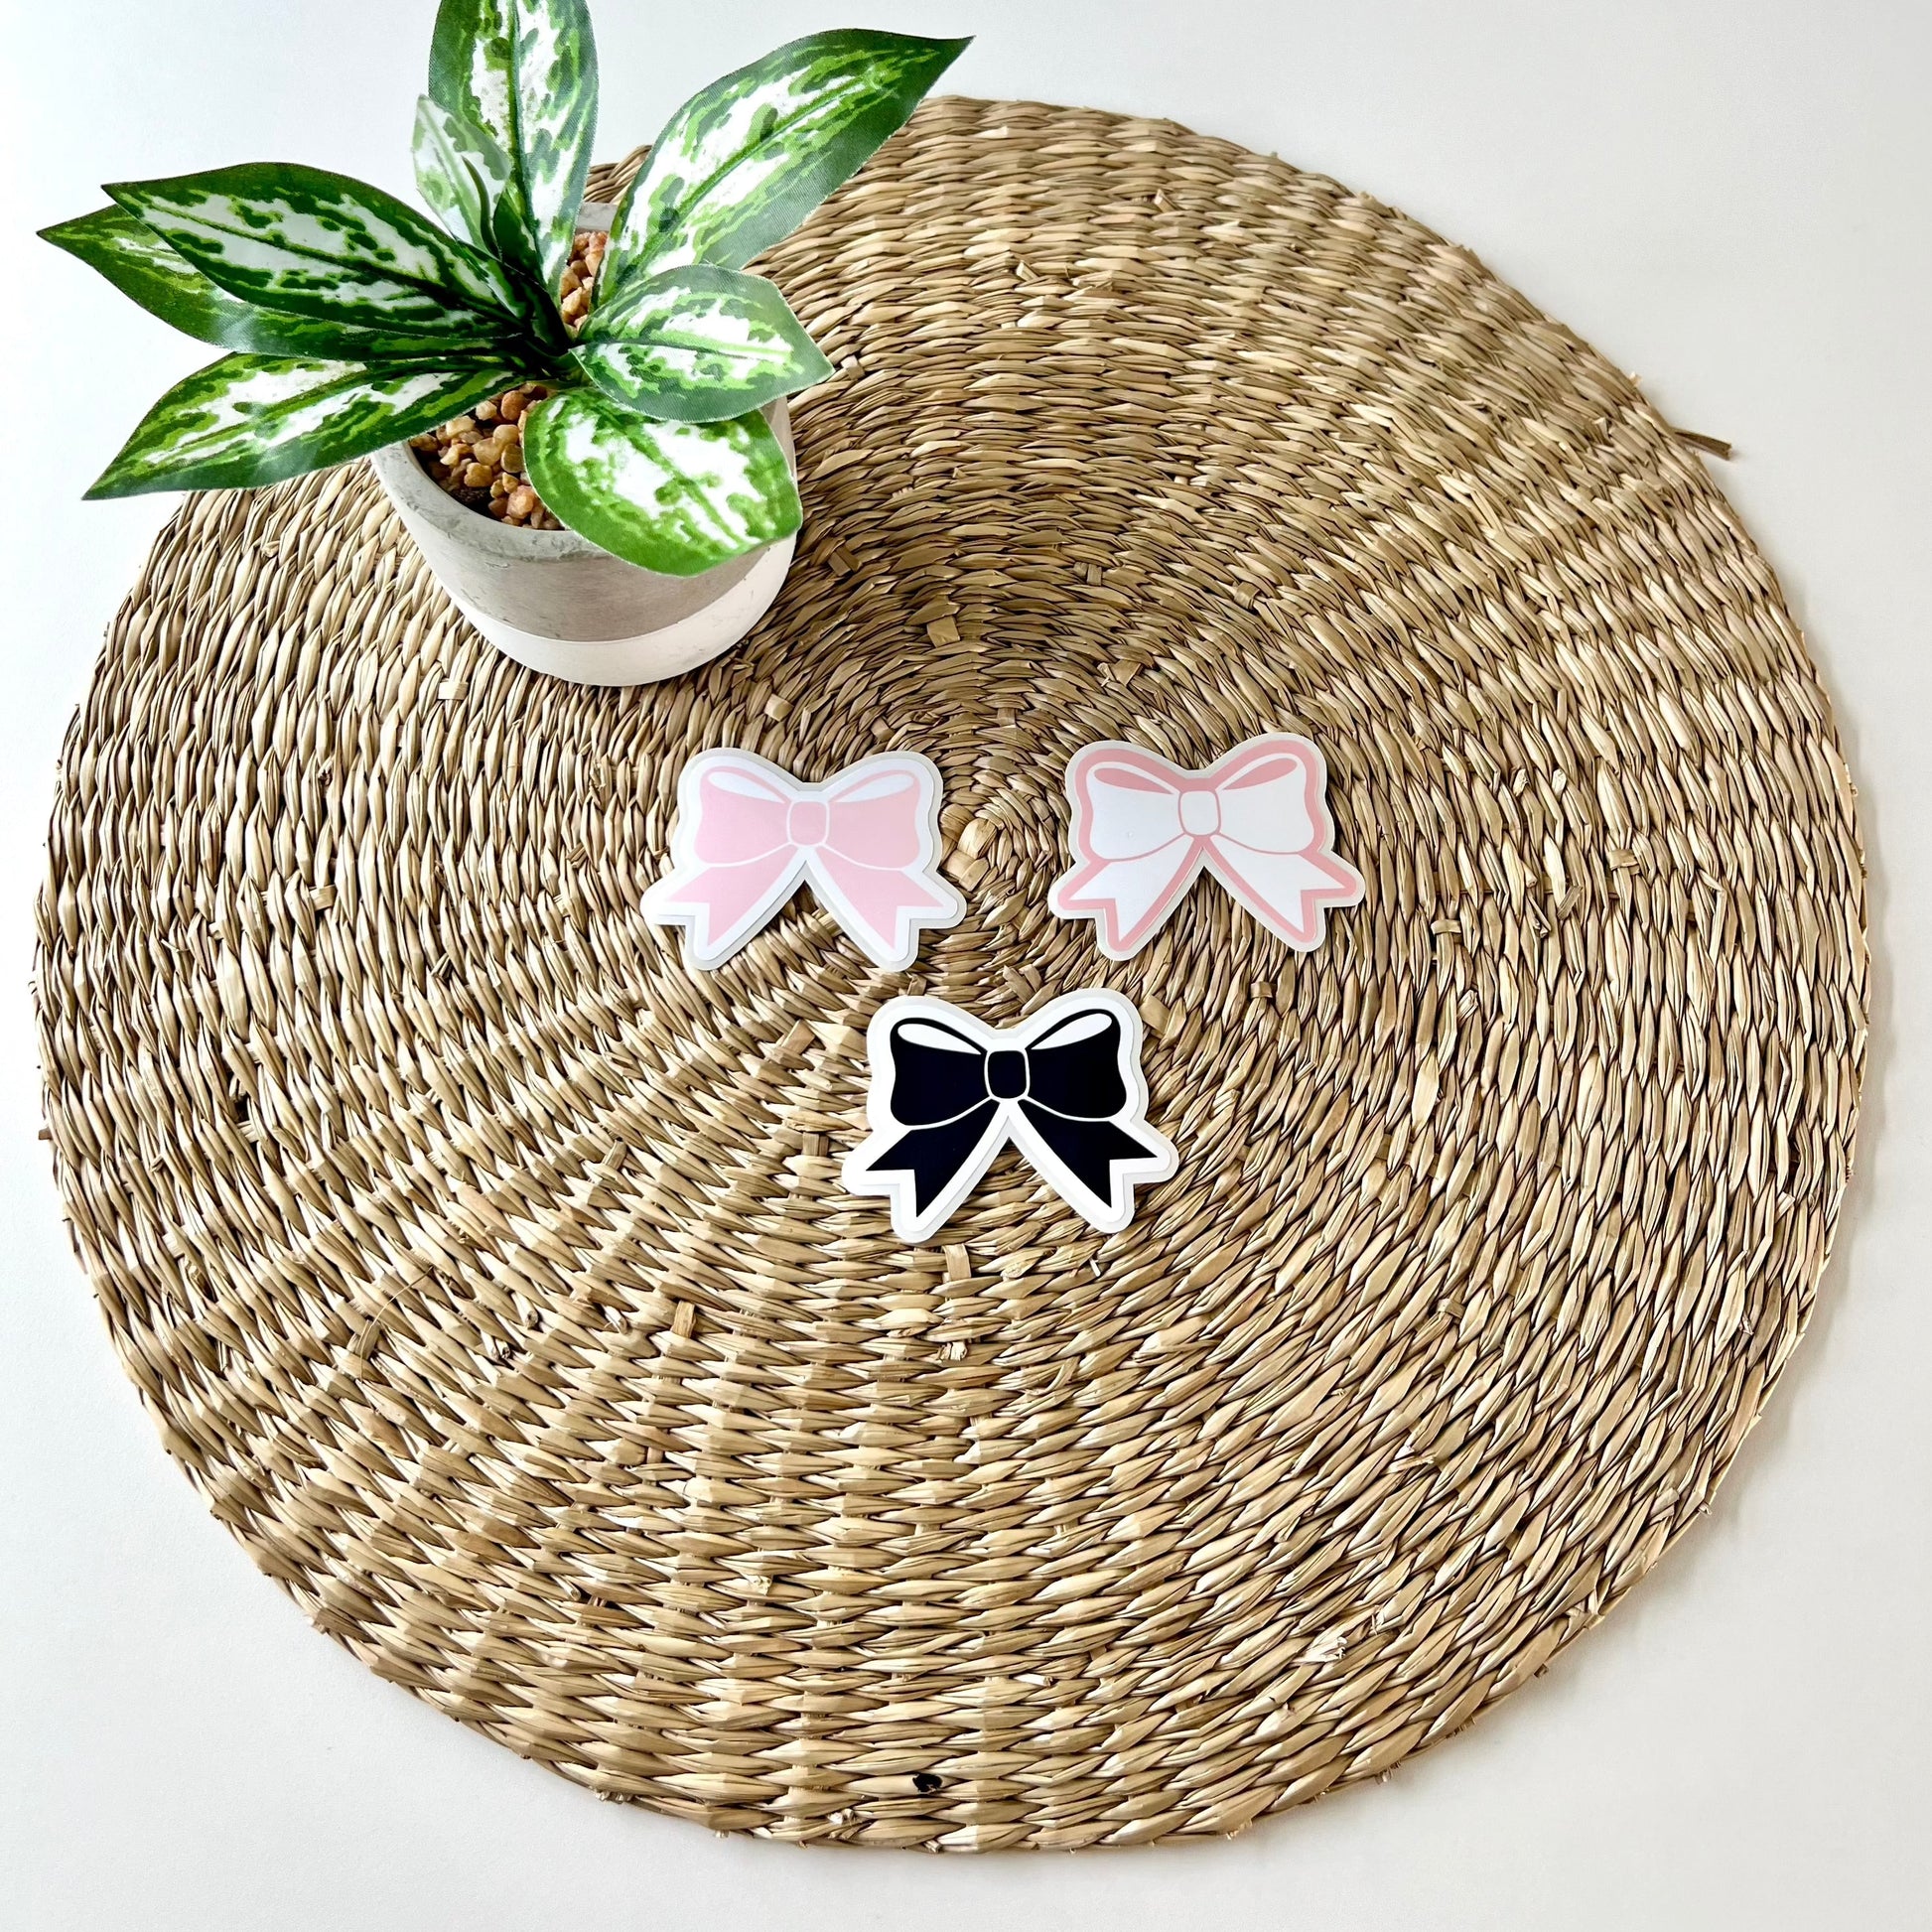 Bow Stickers in Light Pink, Black and White